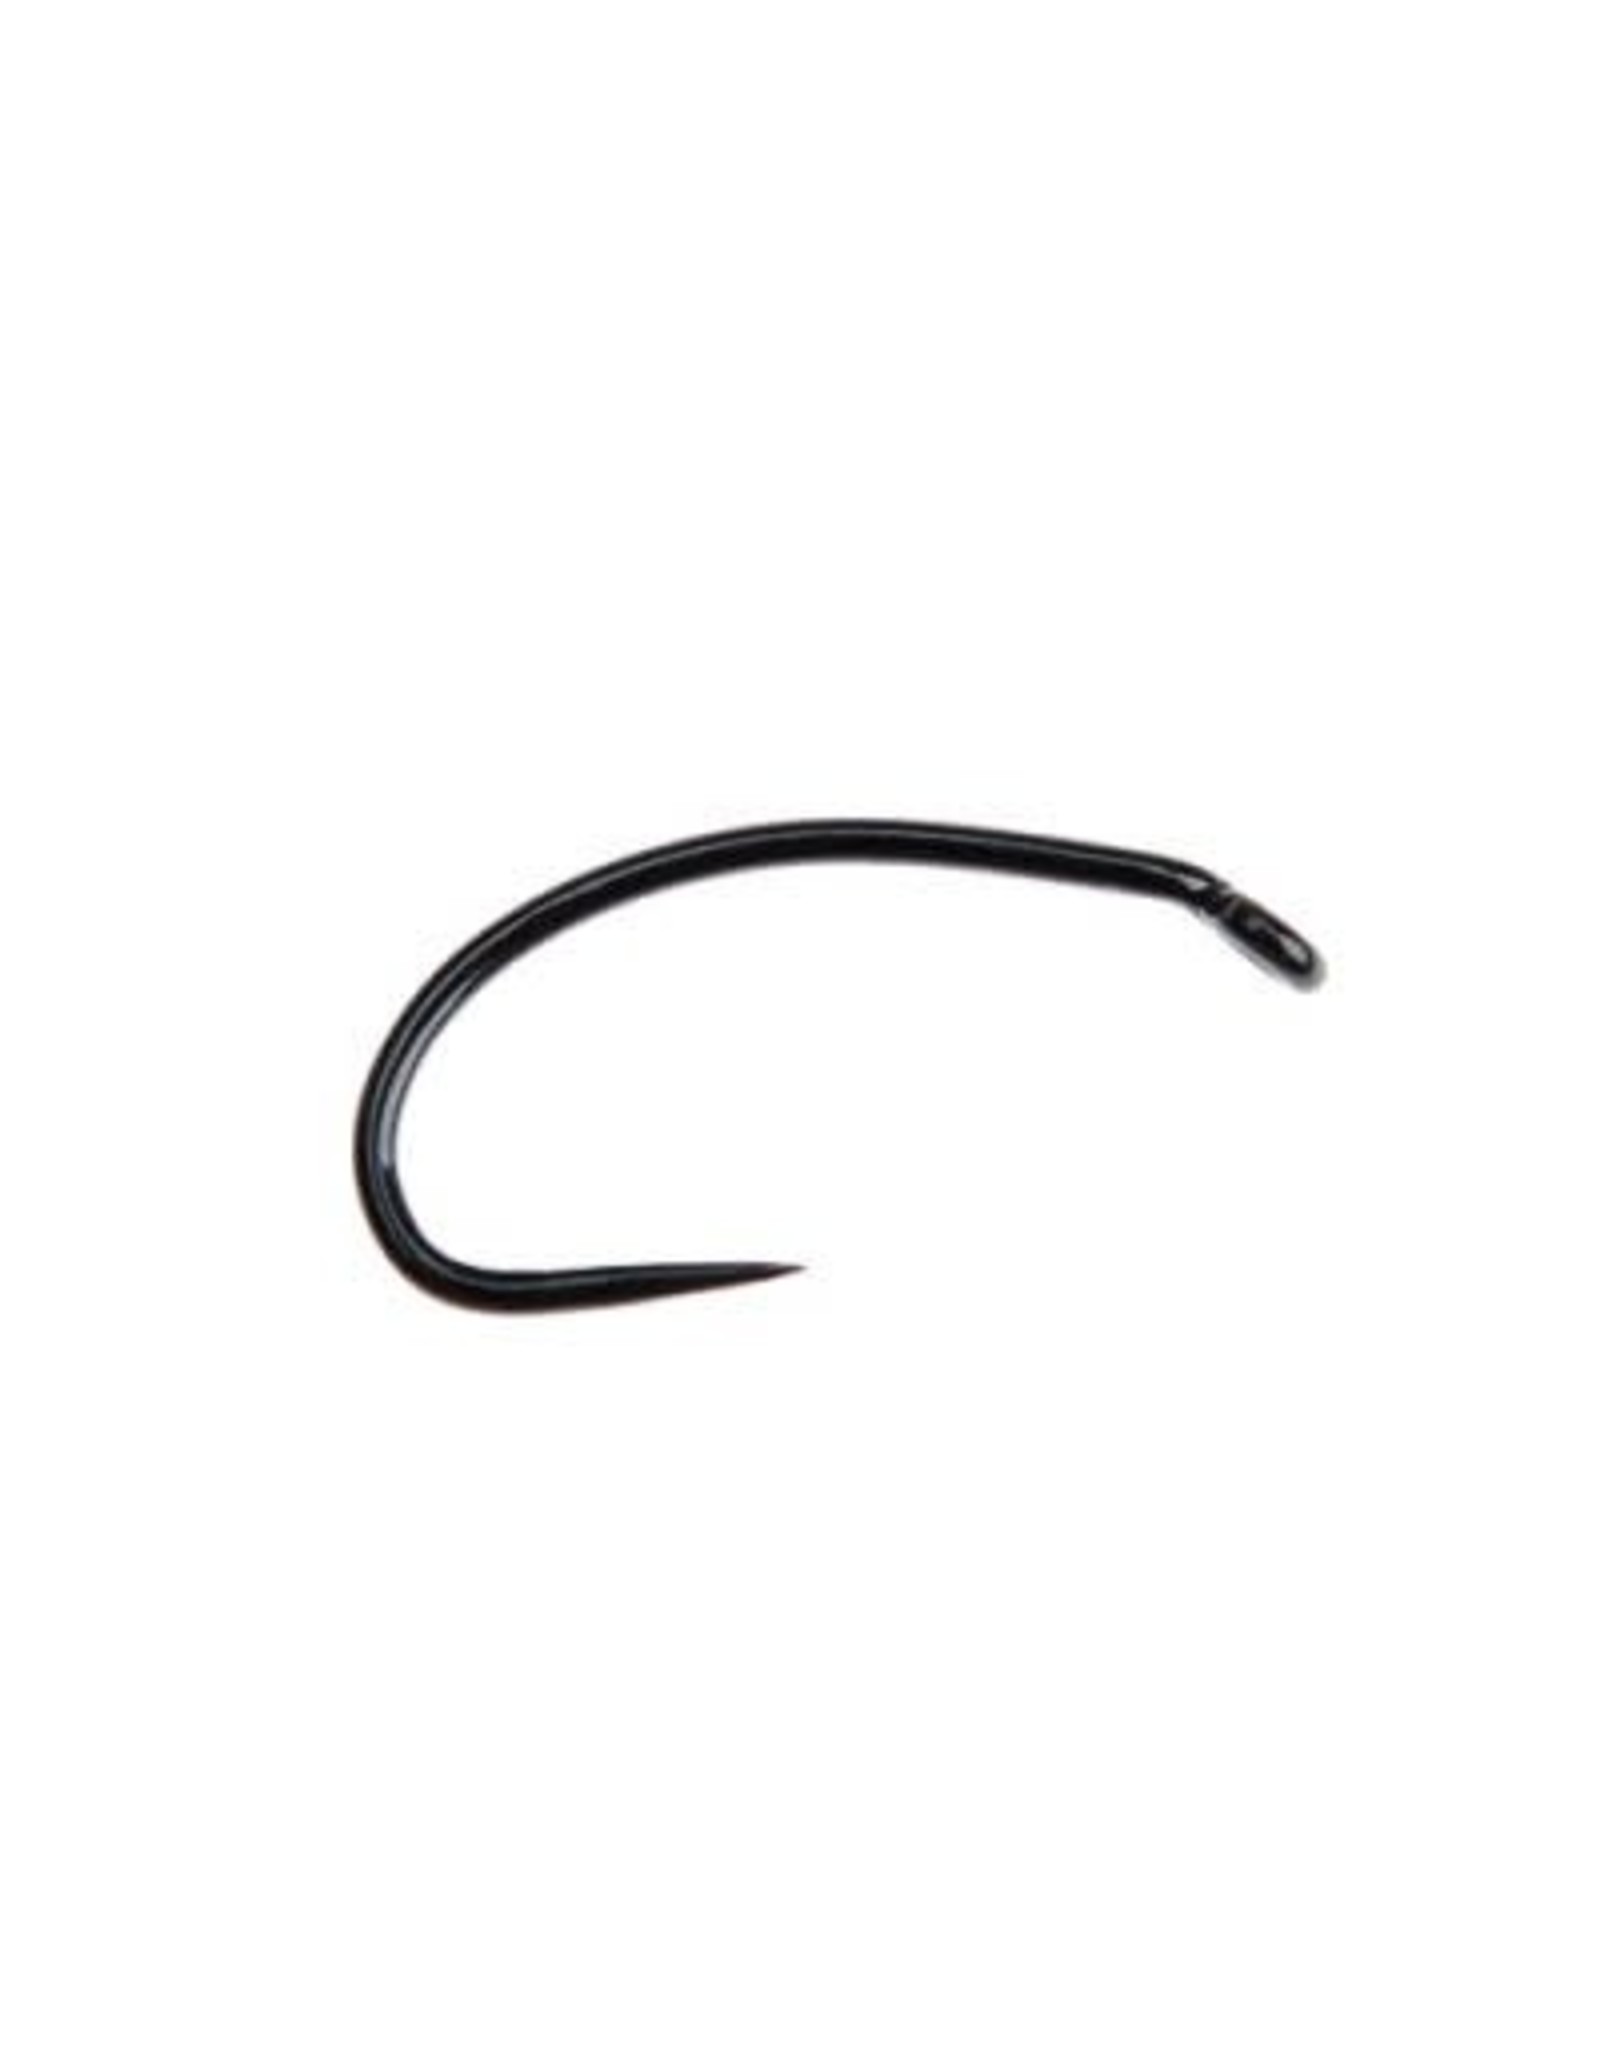 Ahrex Hooks AHREX FW541 #10 Curved Nymph Barbless